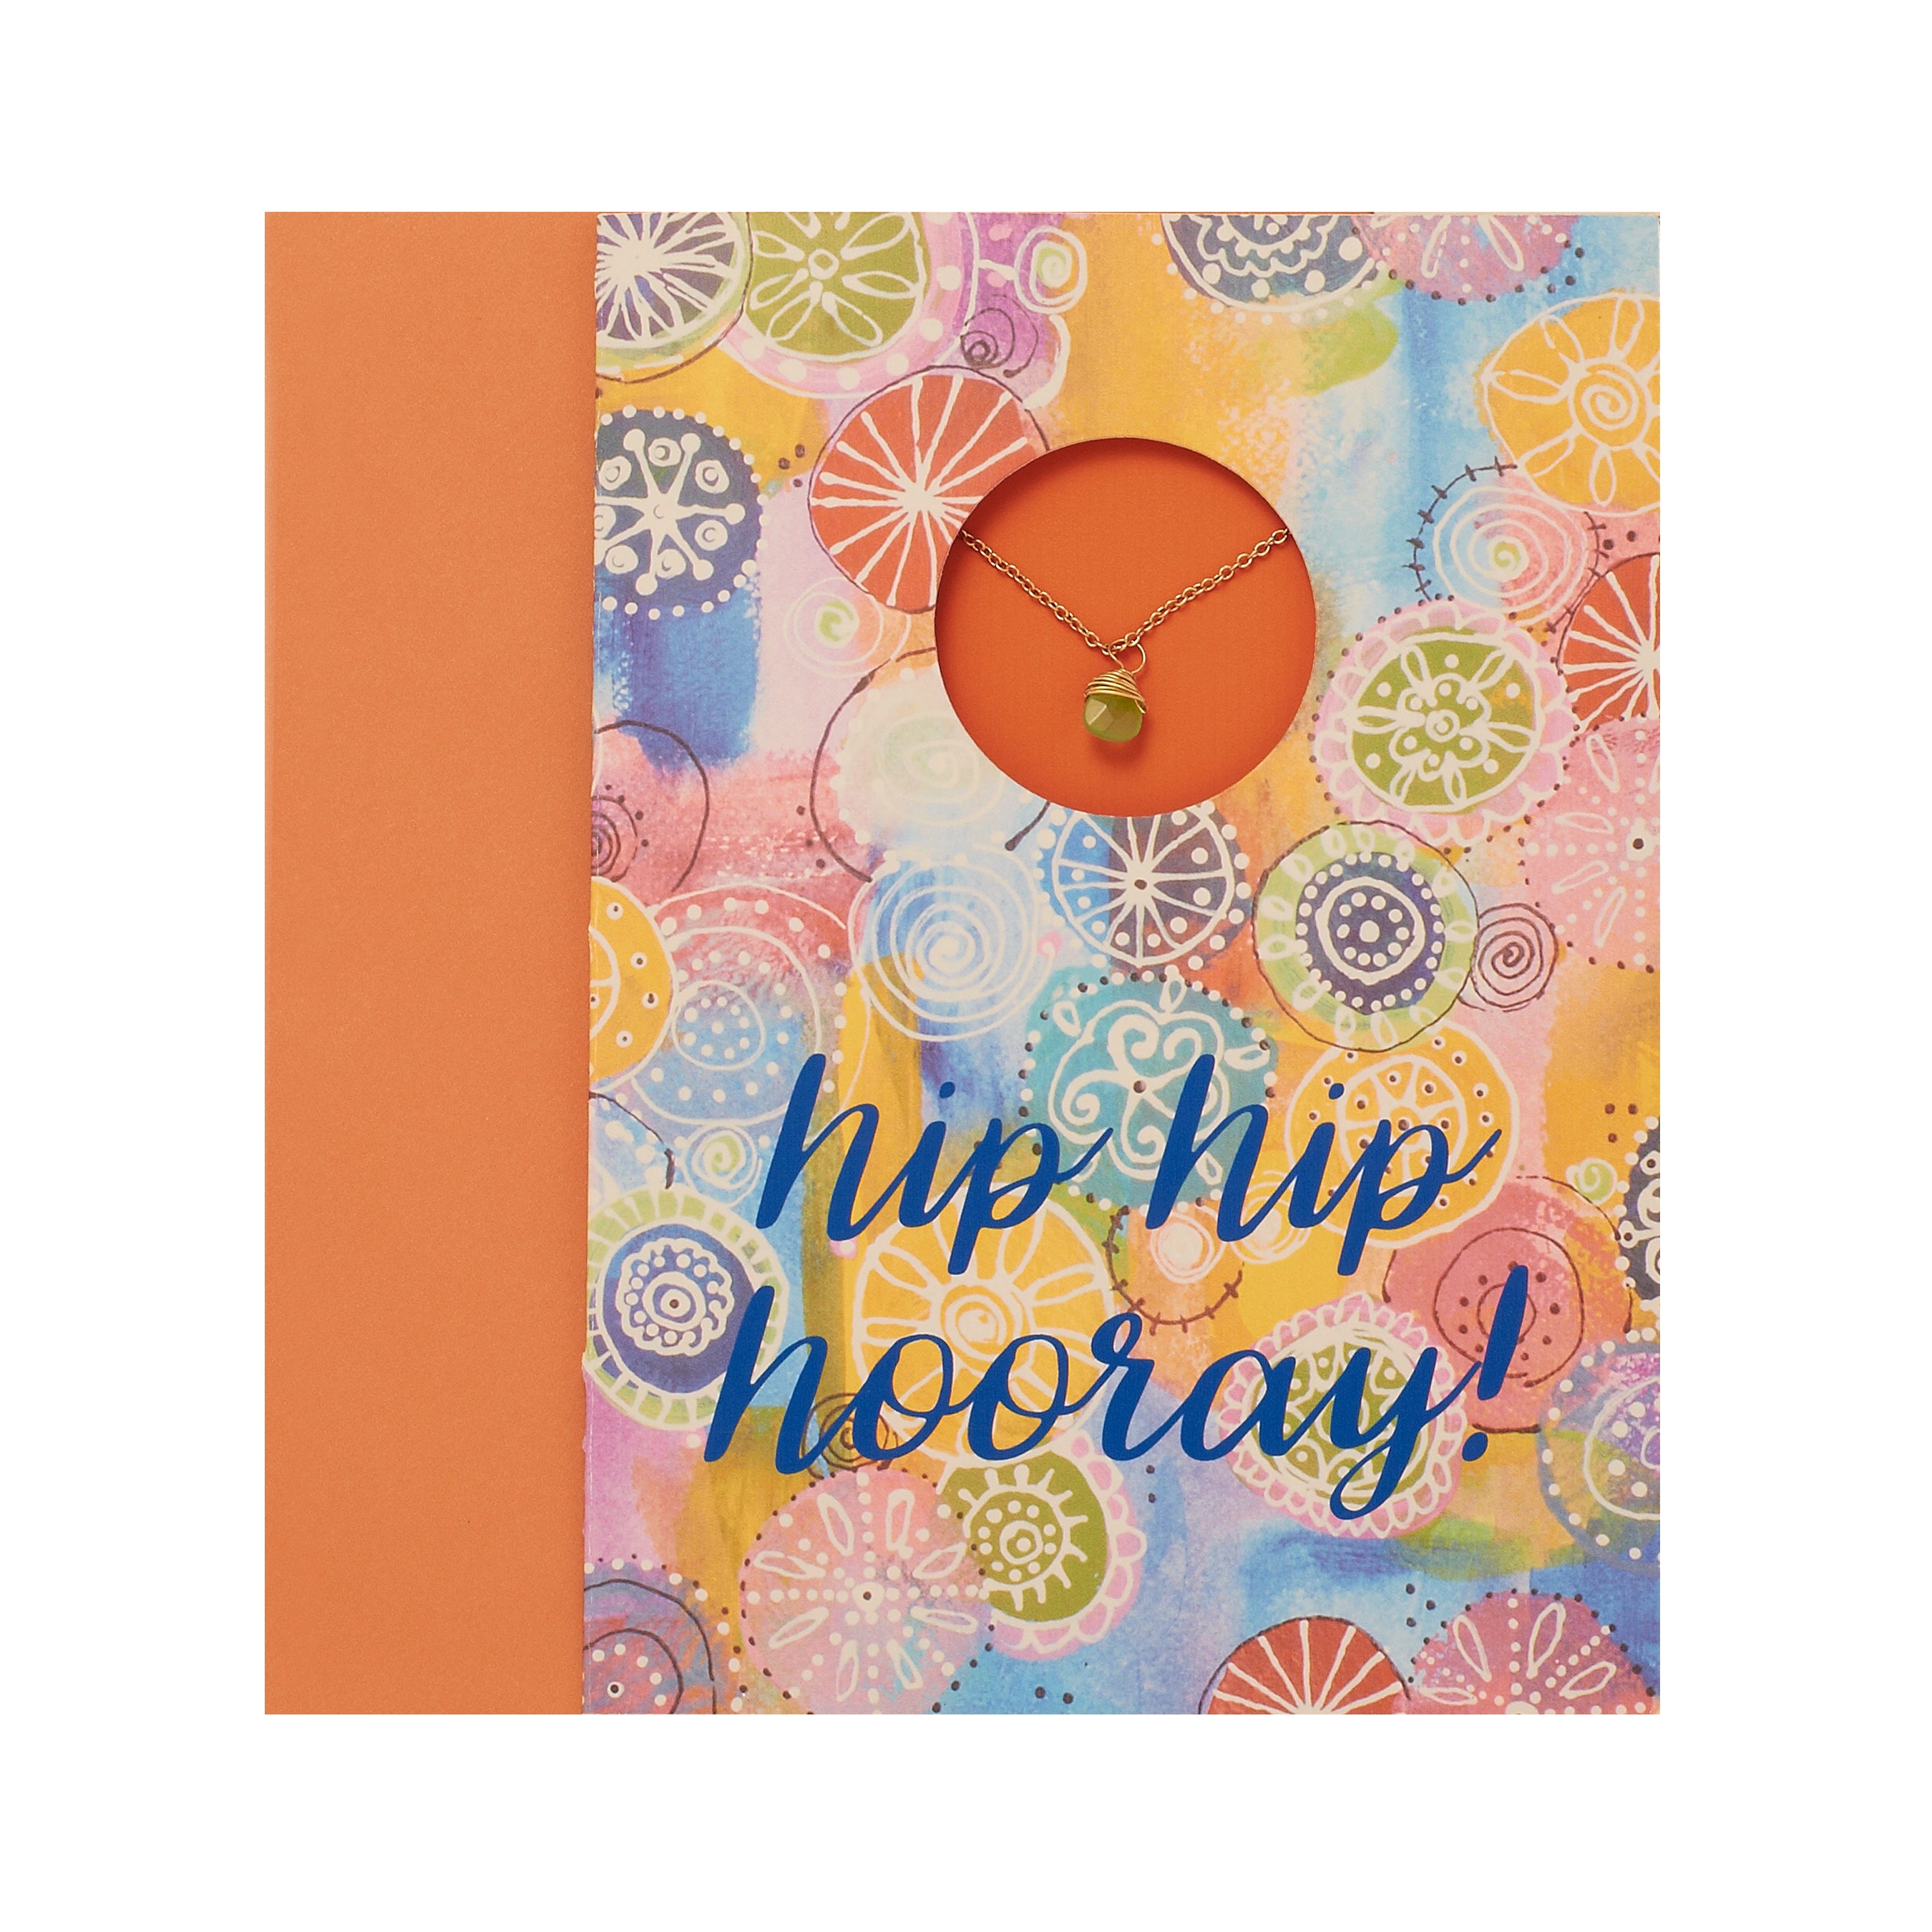 4 Pack of Greeting Cards With Necklace-"Hip Hip Hooray!"